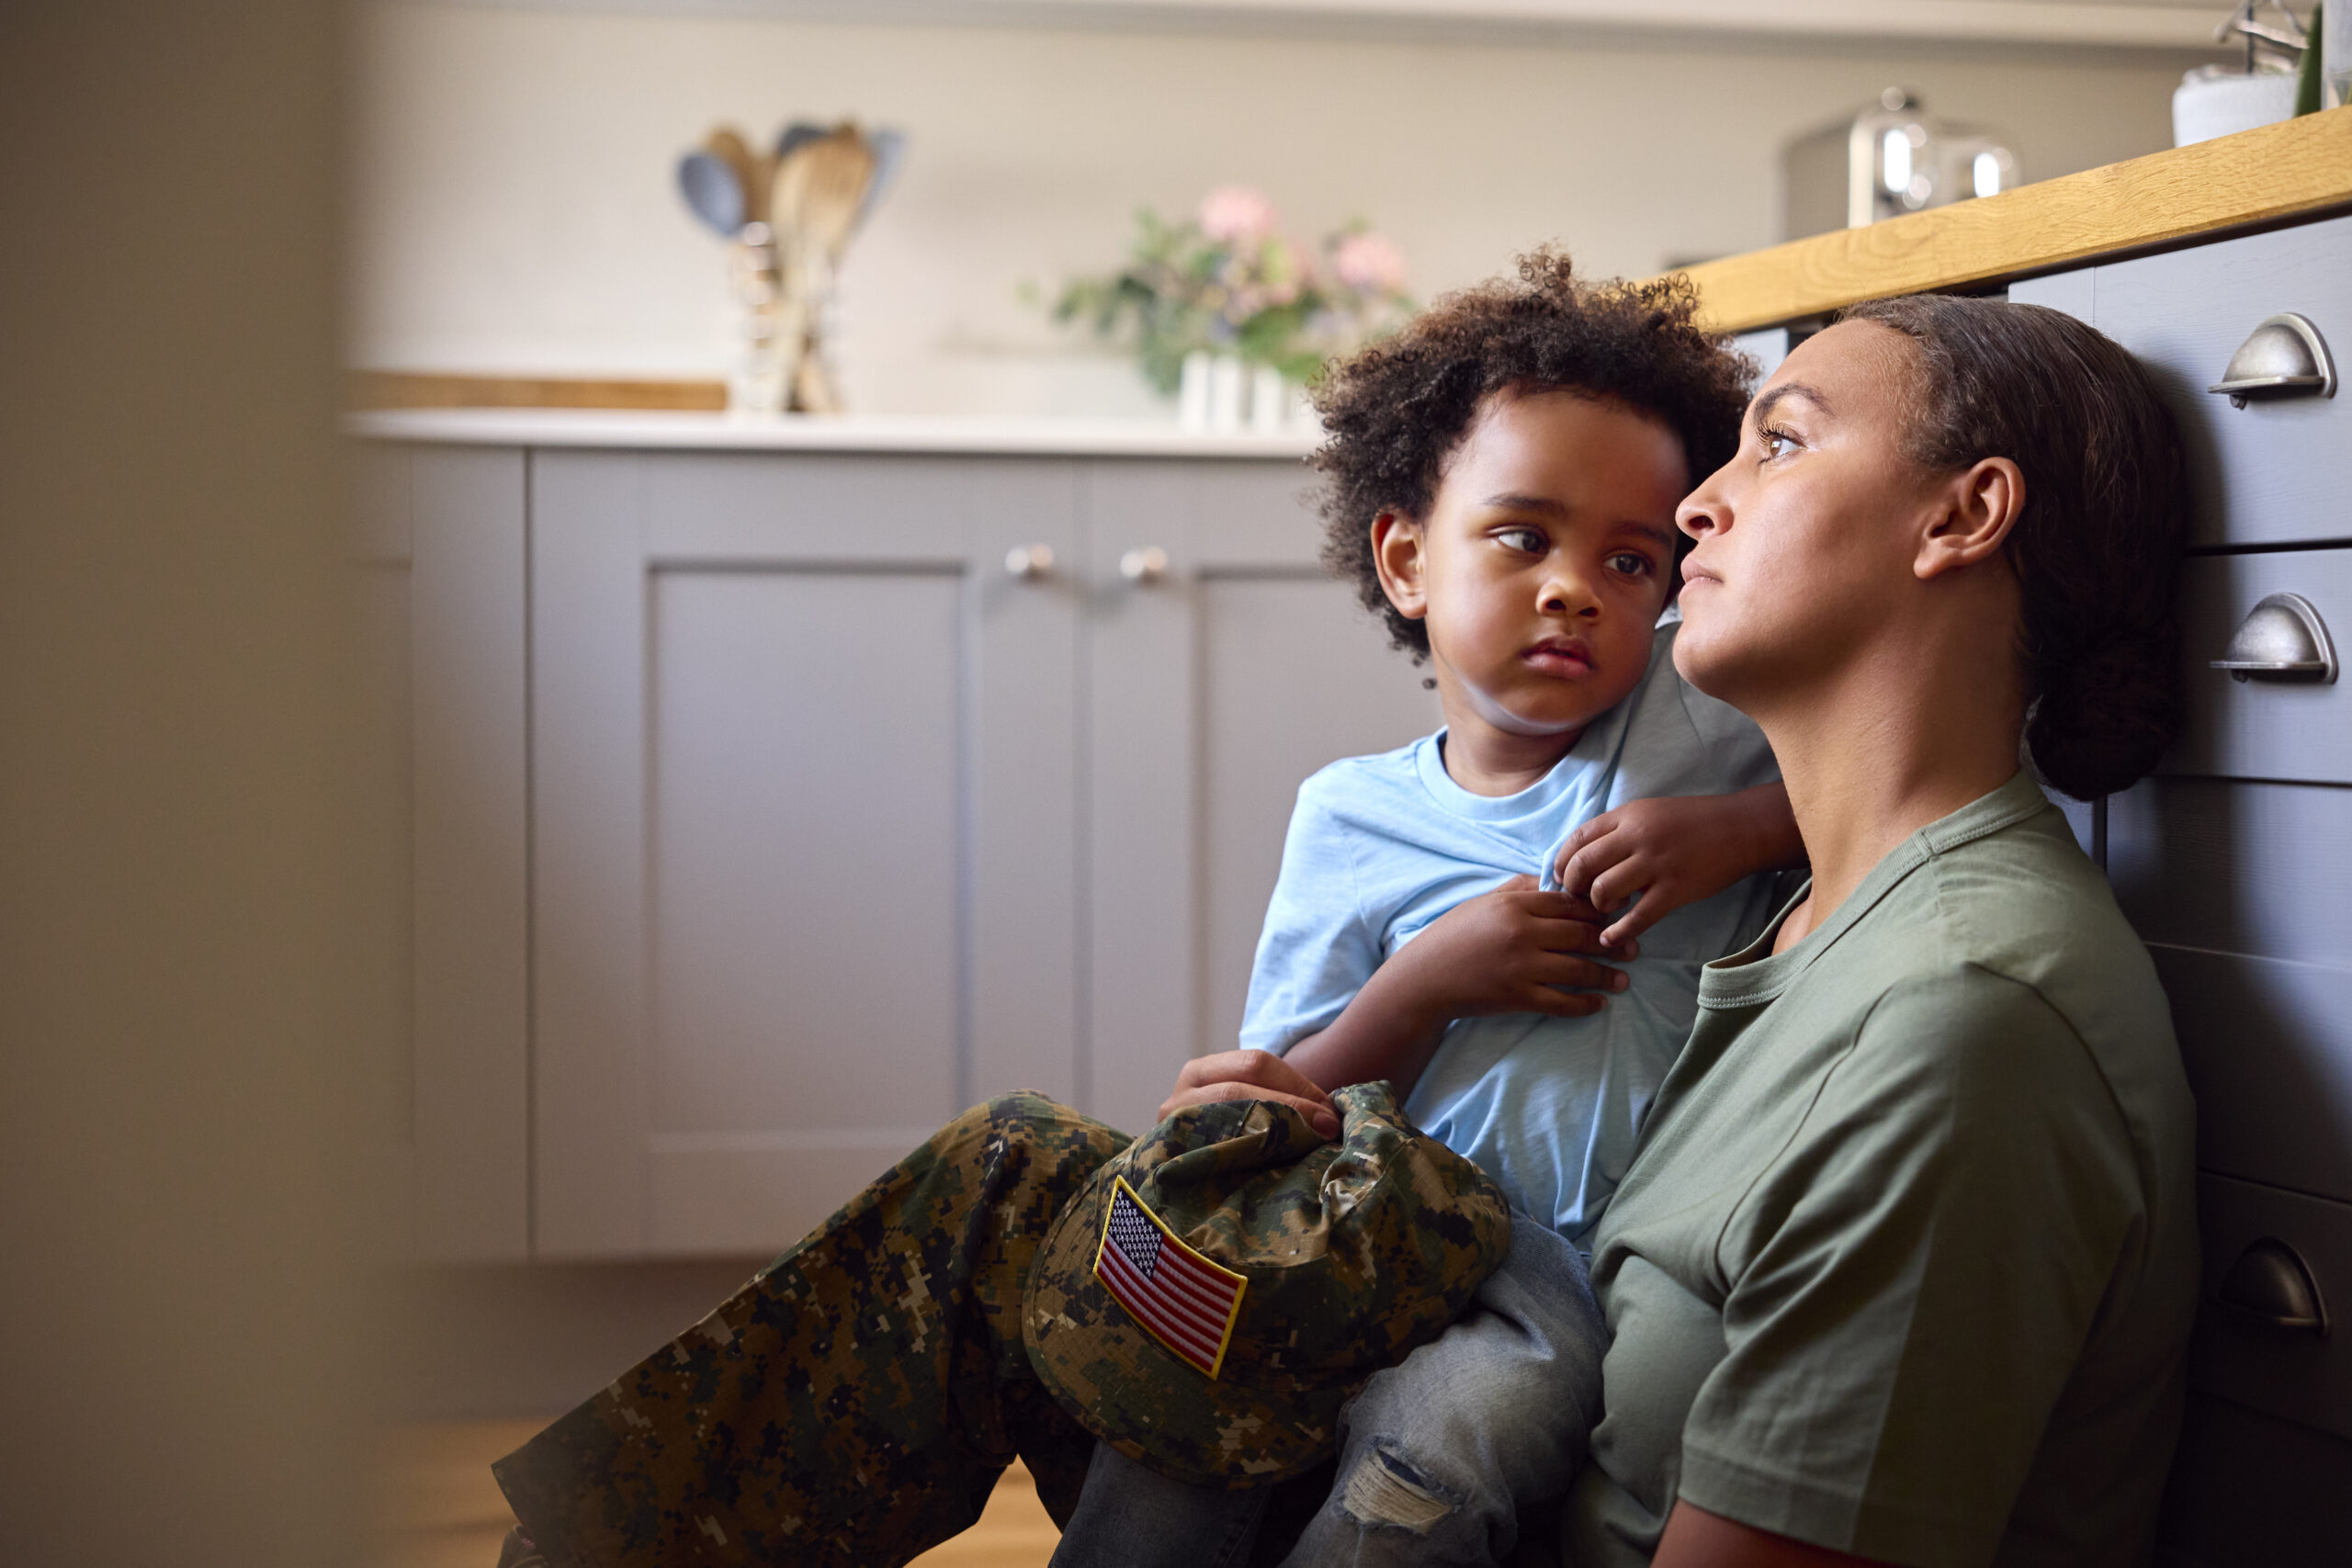 service member parent holds their child, both having looks of concern or stress on their face